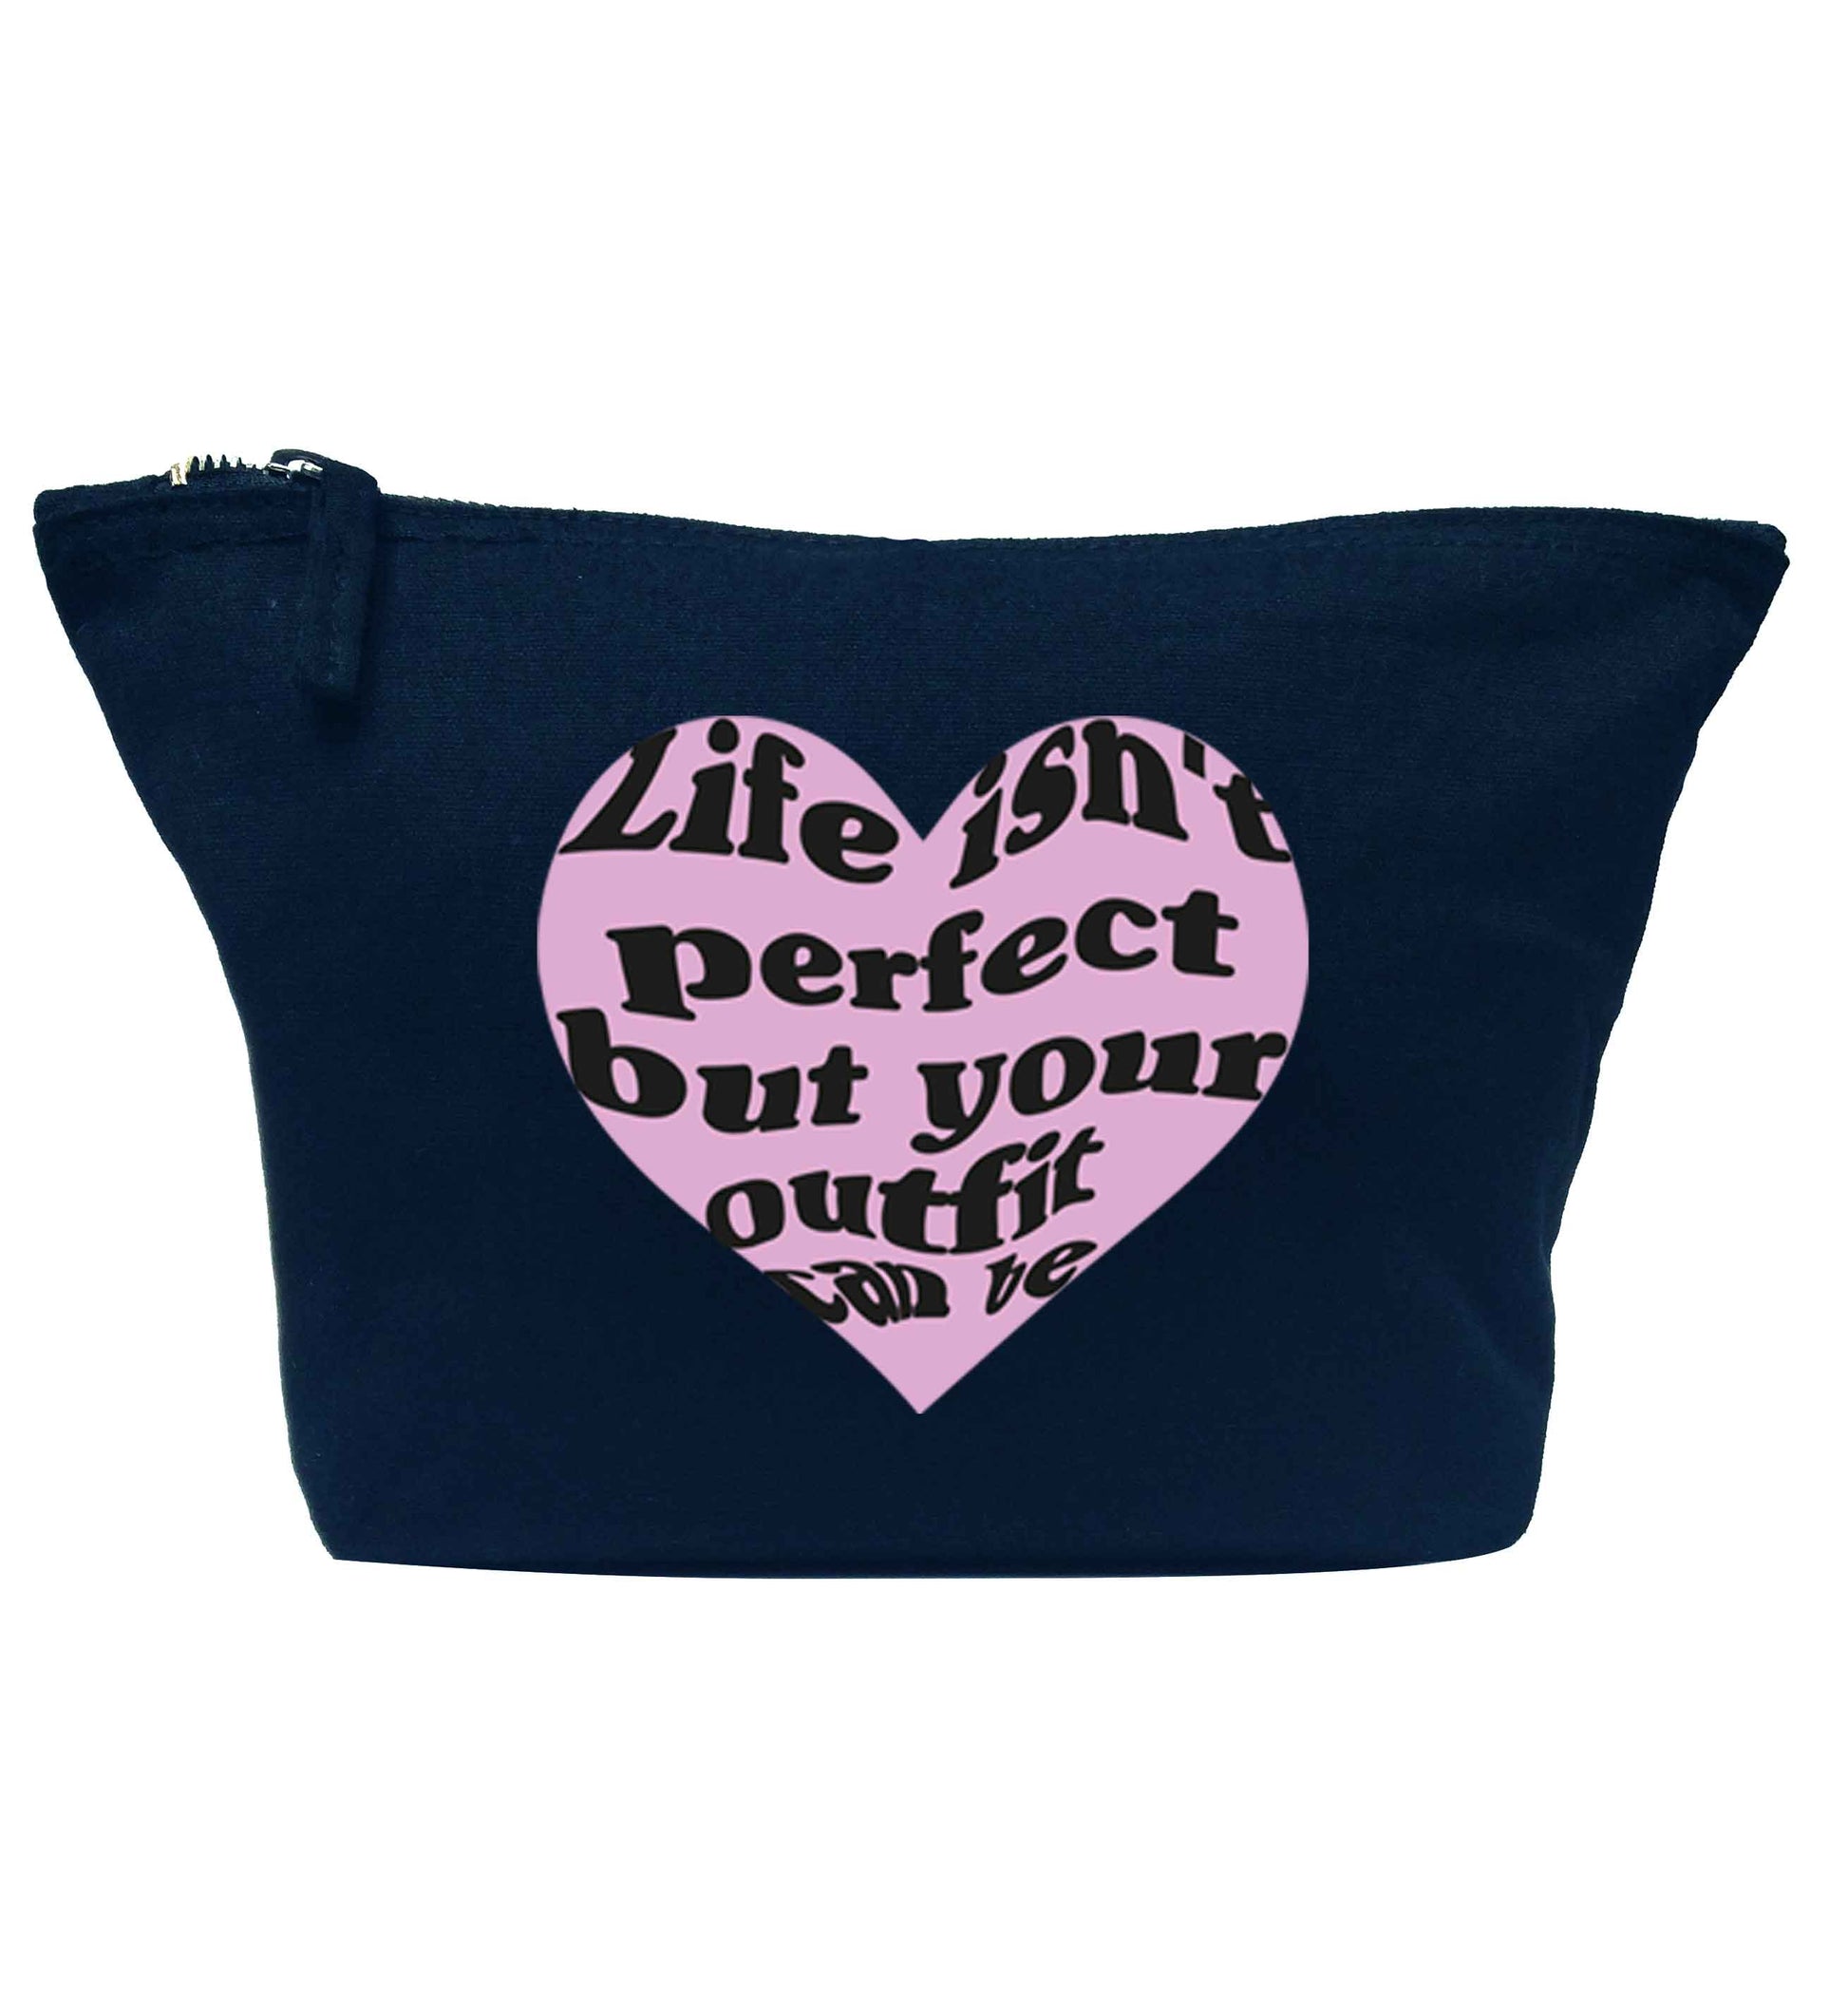 Life isn't perfect but your outfit can be navy makeup bag